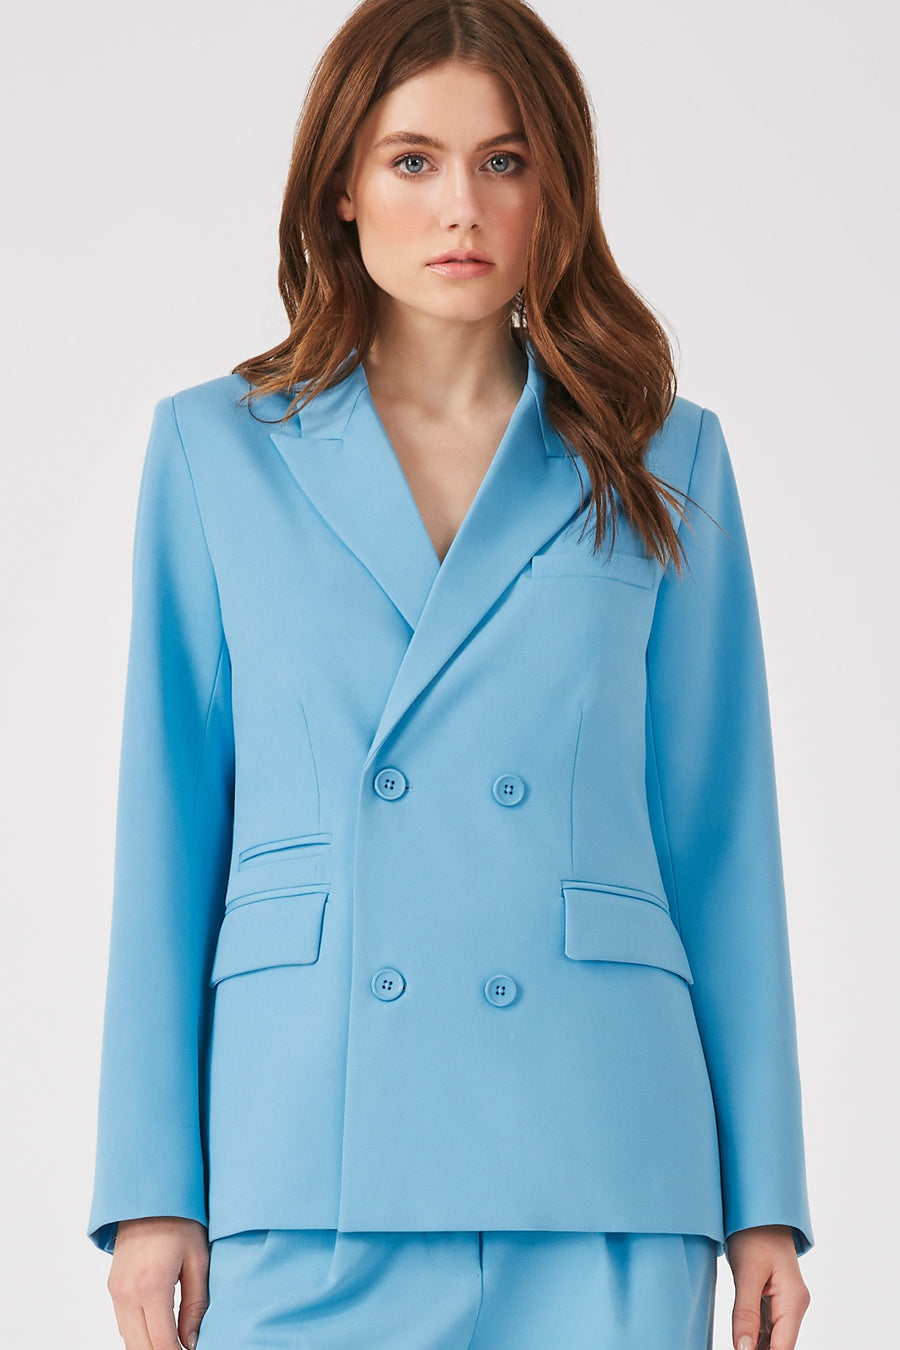 THE MULBERRY DOUBLE BREASTED BLAZER - OPEN AIR